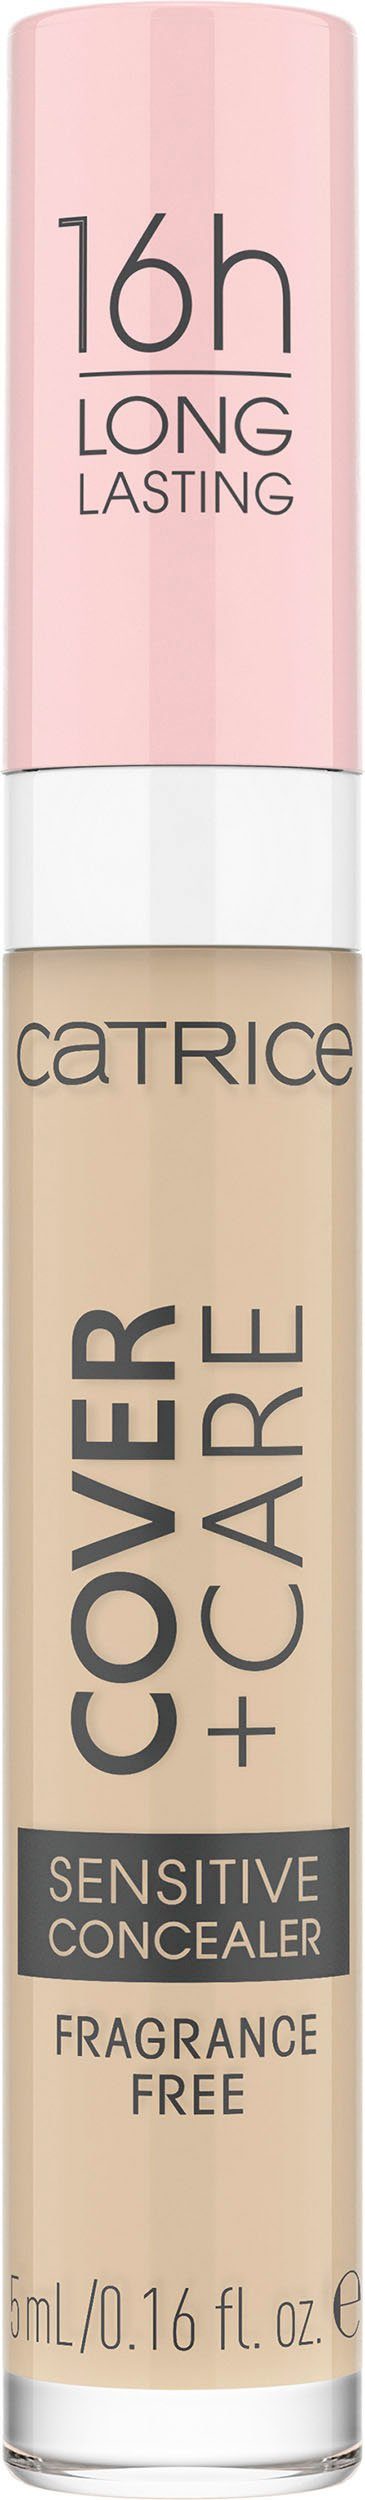 Catrice Concealer Catrice 3-tlg. + Sensitive Concealer, nude Care 010C Cover